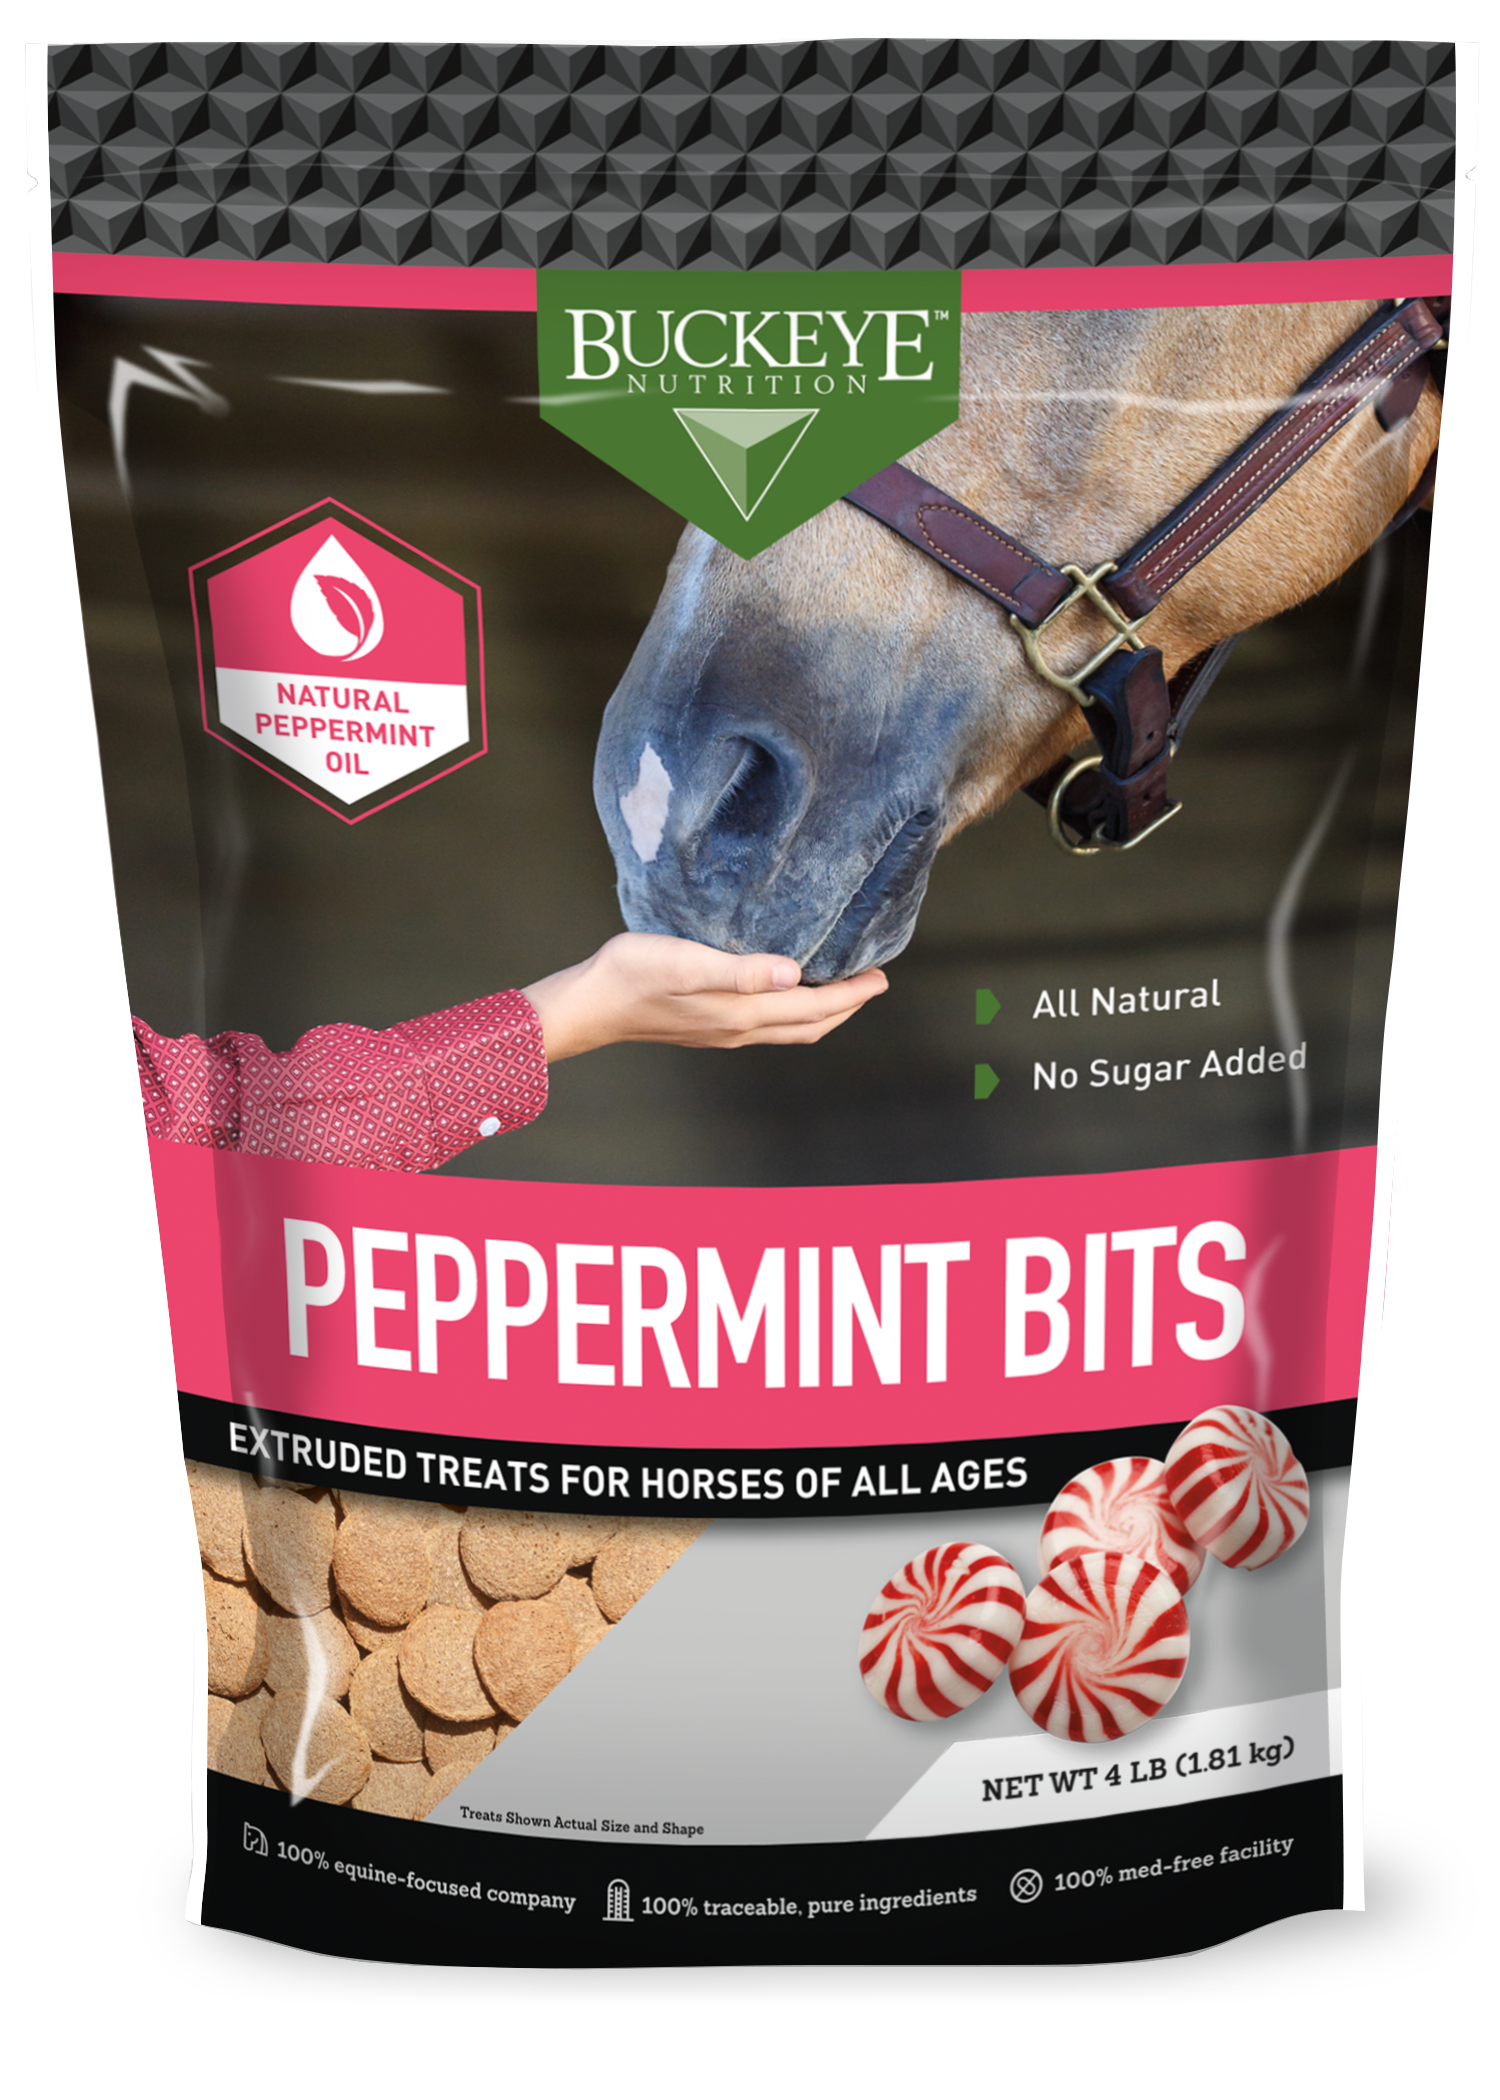 All Natural No Sugar Added Peppermint Bits Treats package image